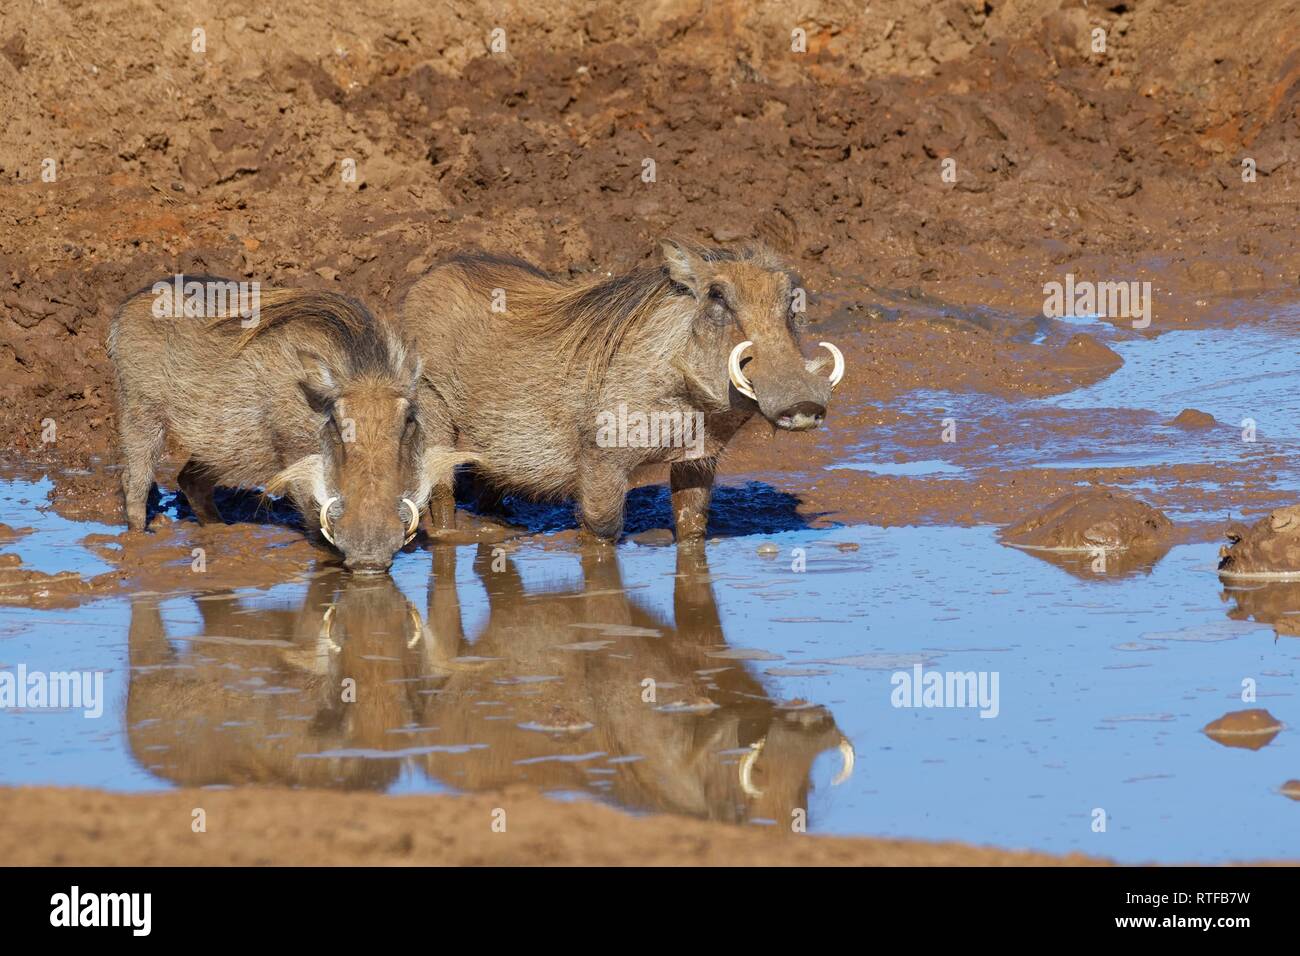 Common warthogs (Phacochoerus africanus), two adults in muddy water, drinking at a waterhole, Addo Elephant National Park Stock Photo